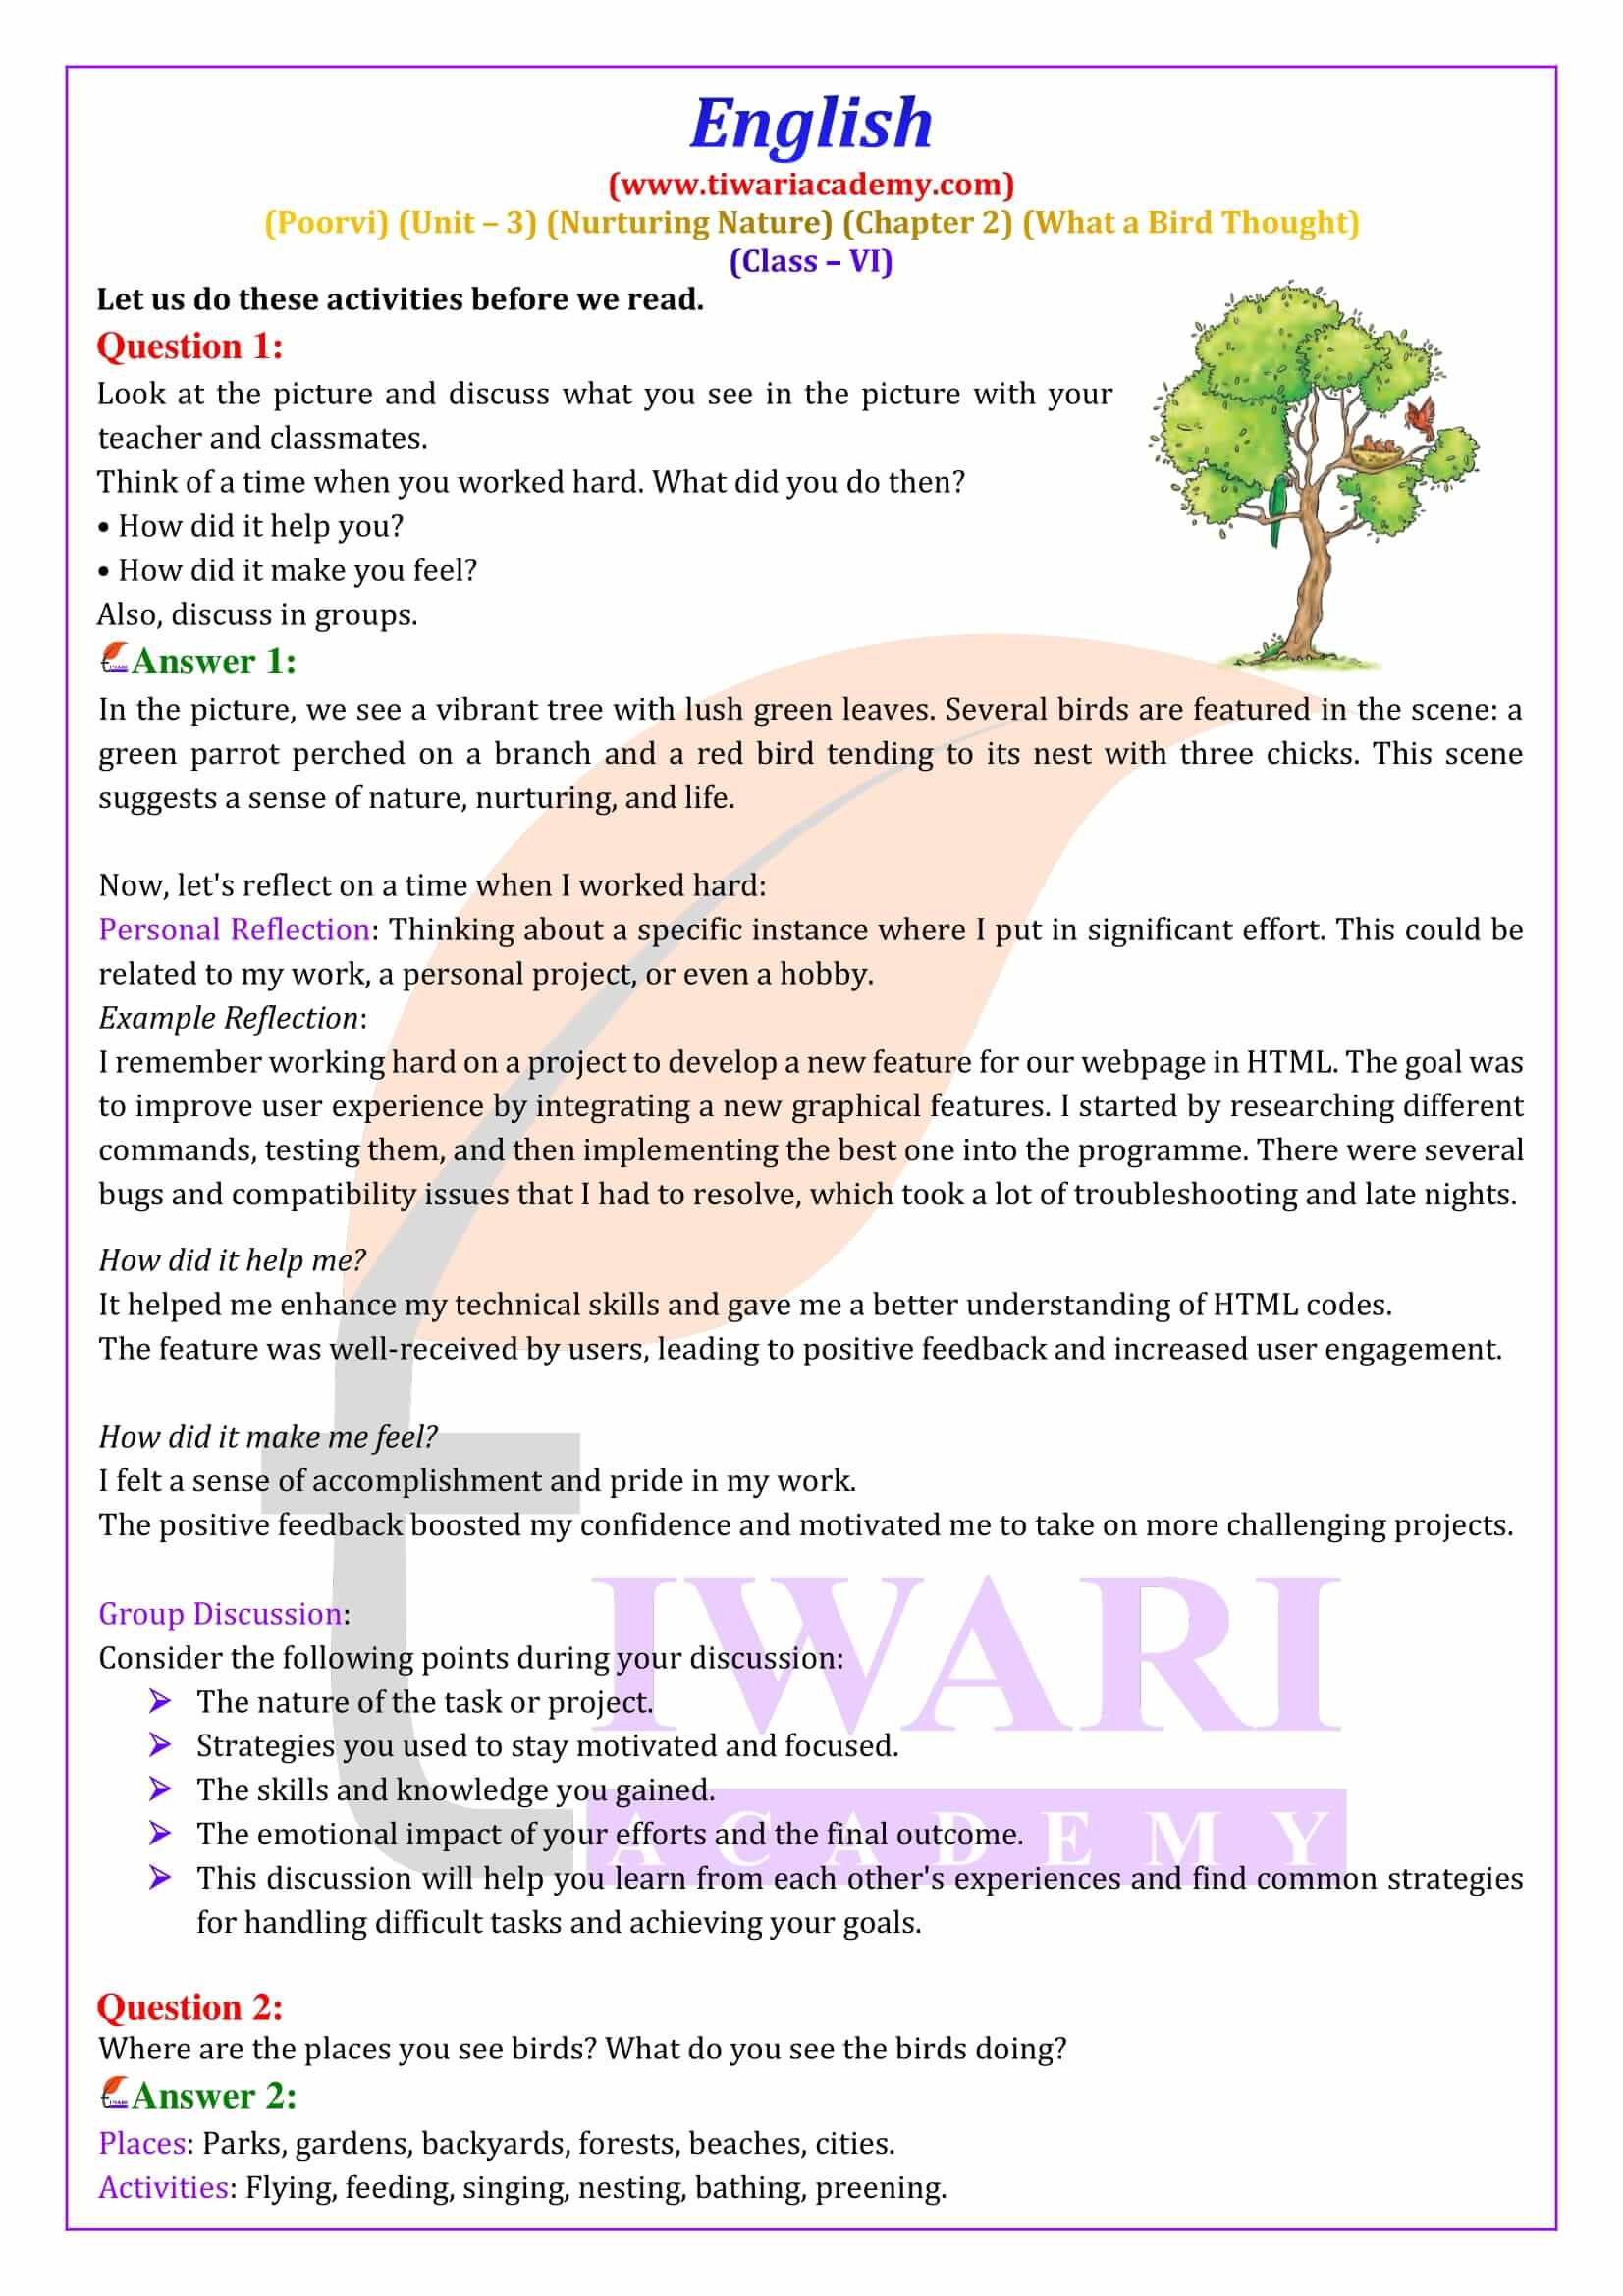 NCERT Solutions for Class 6 English Poorvi Unit 3 Nurturing Nature Chapter 2 What a Bird Thought